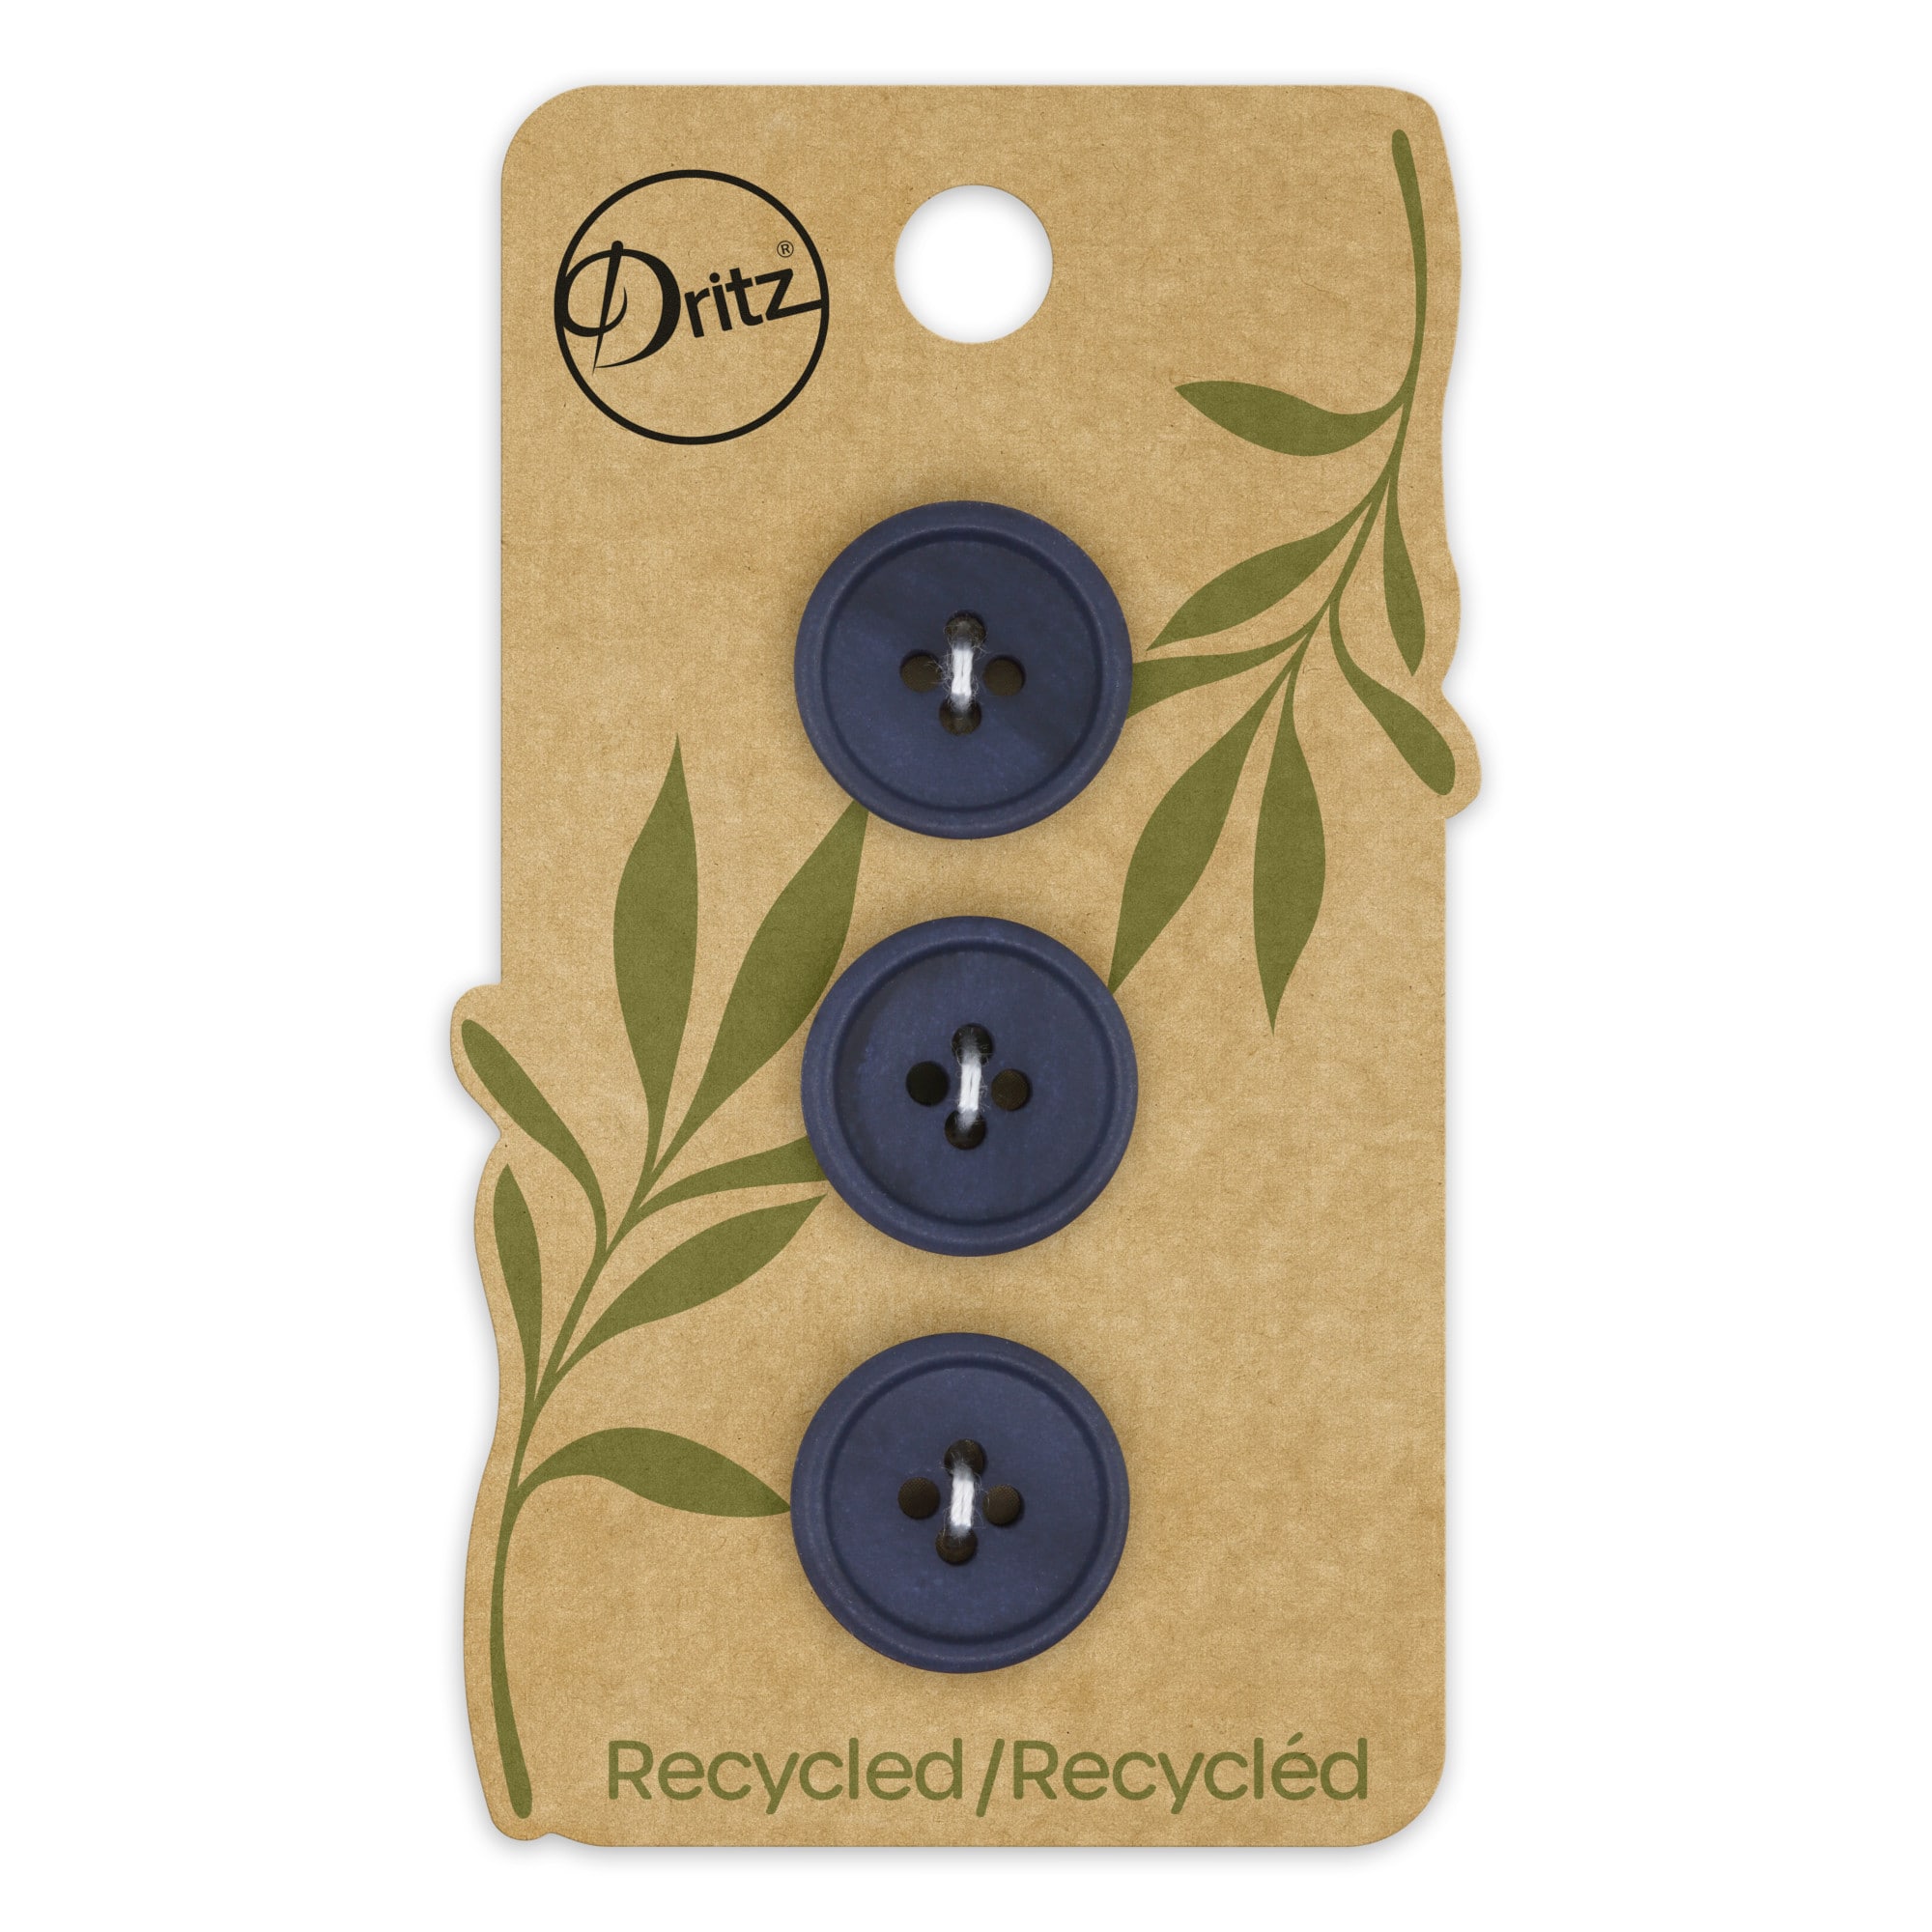 Dritz® 18mm Recycled Paper Round Button, 9ct.